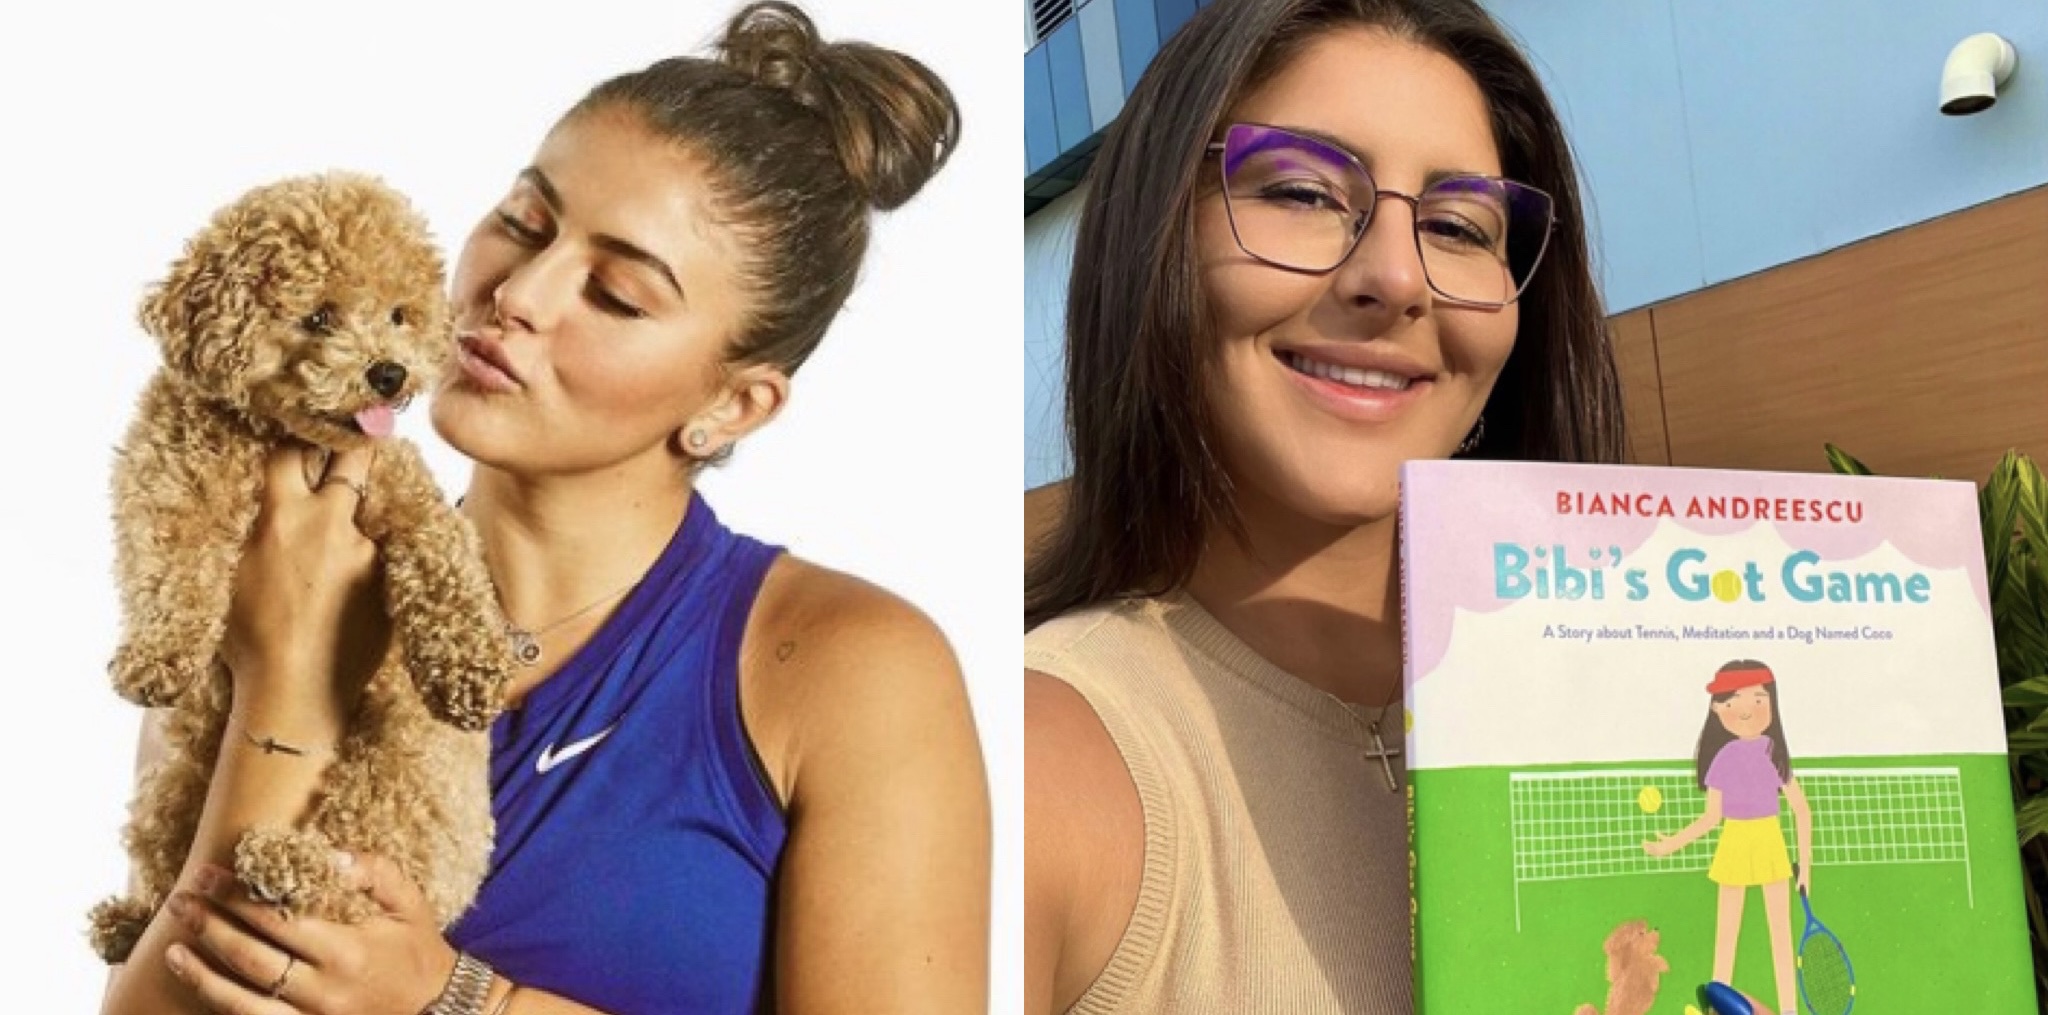 Bianca Andreescu just launched her first picture book, Bibi’s Got Game